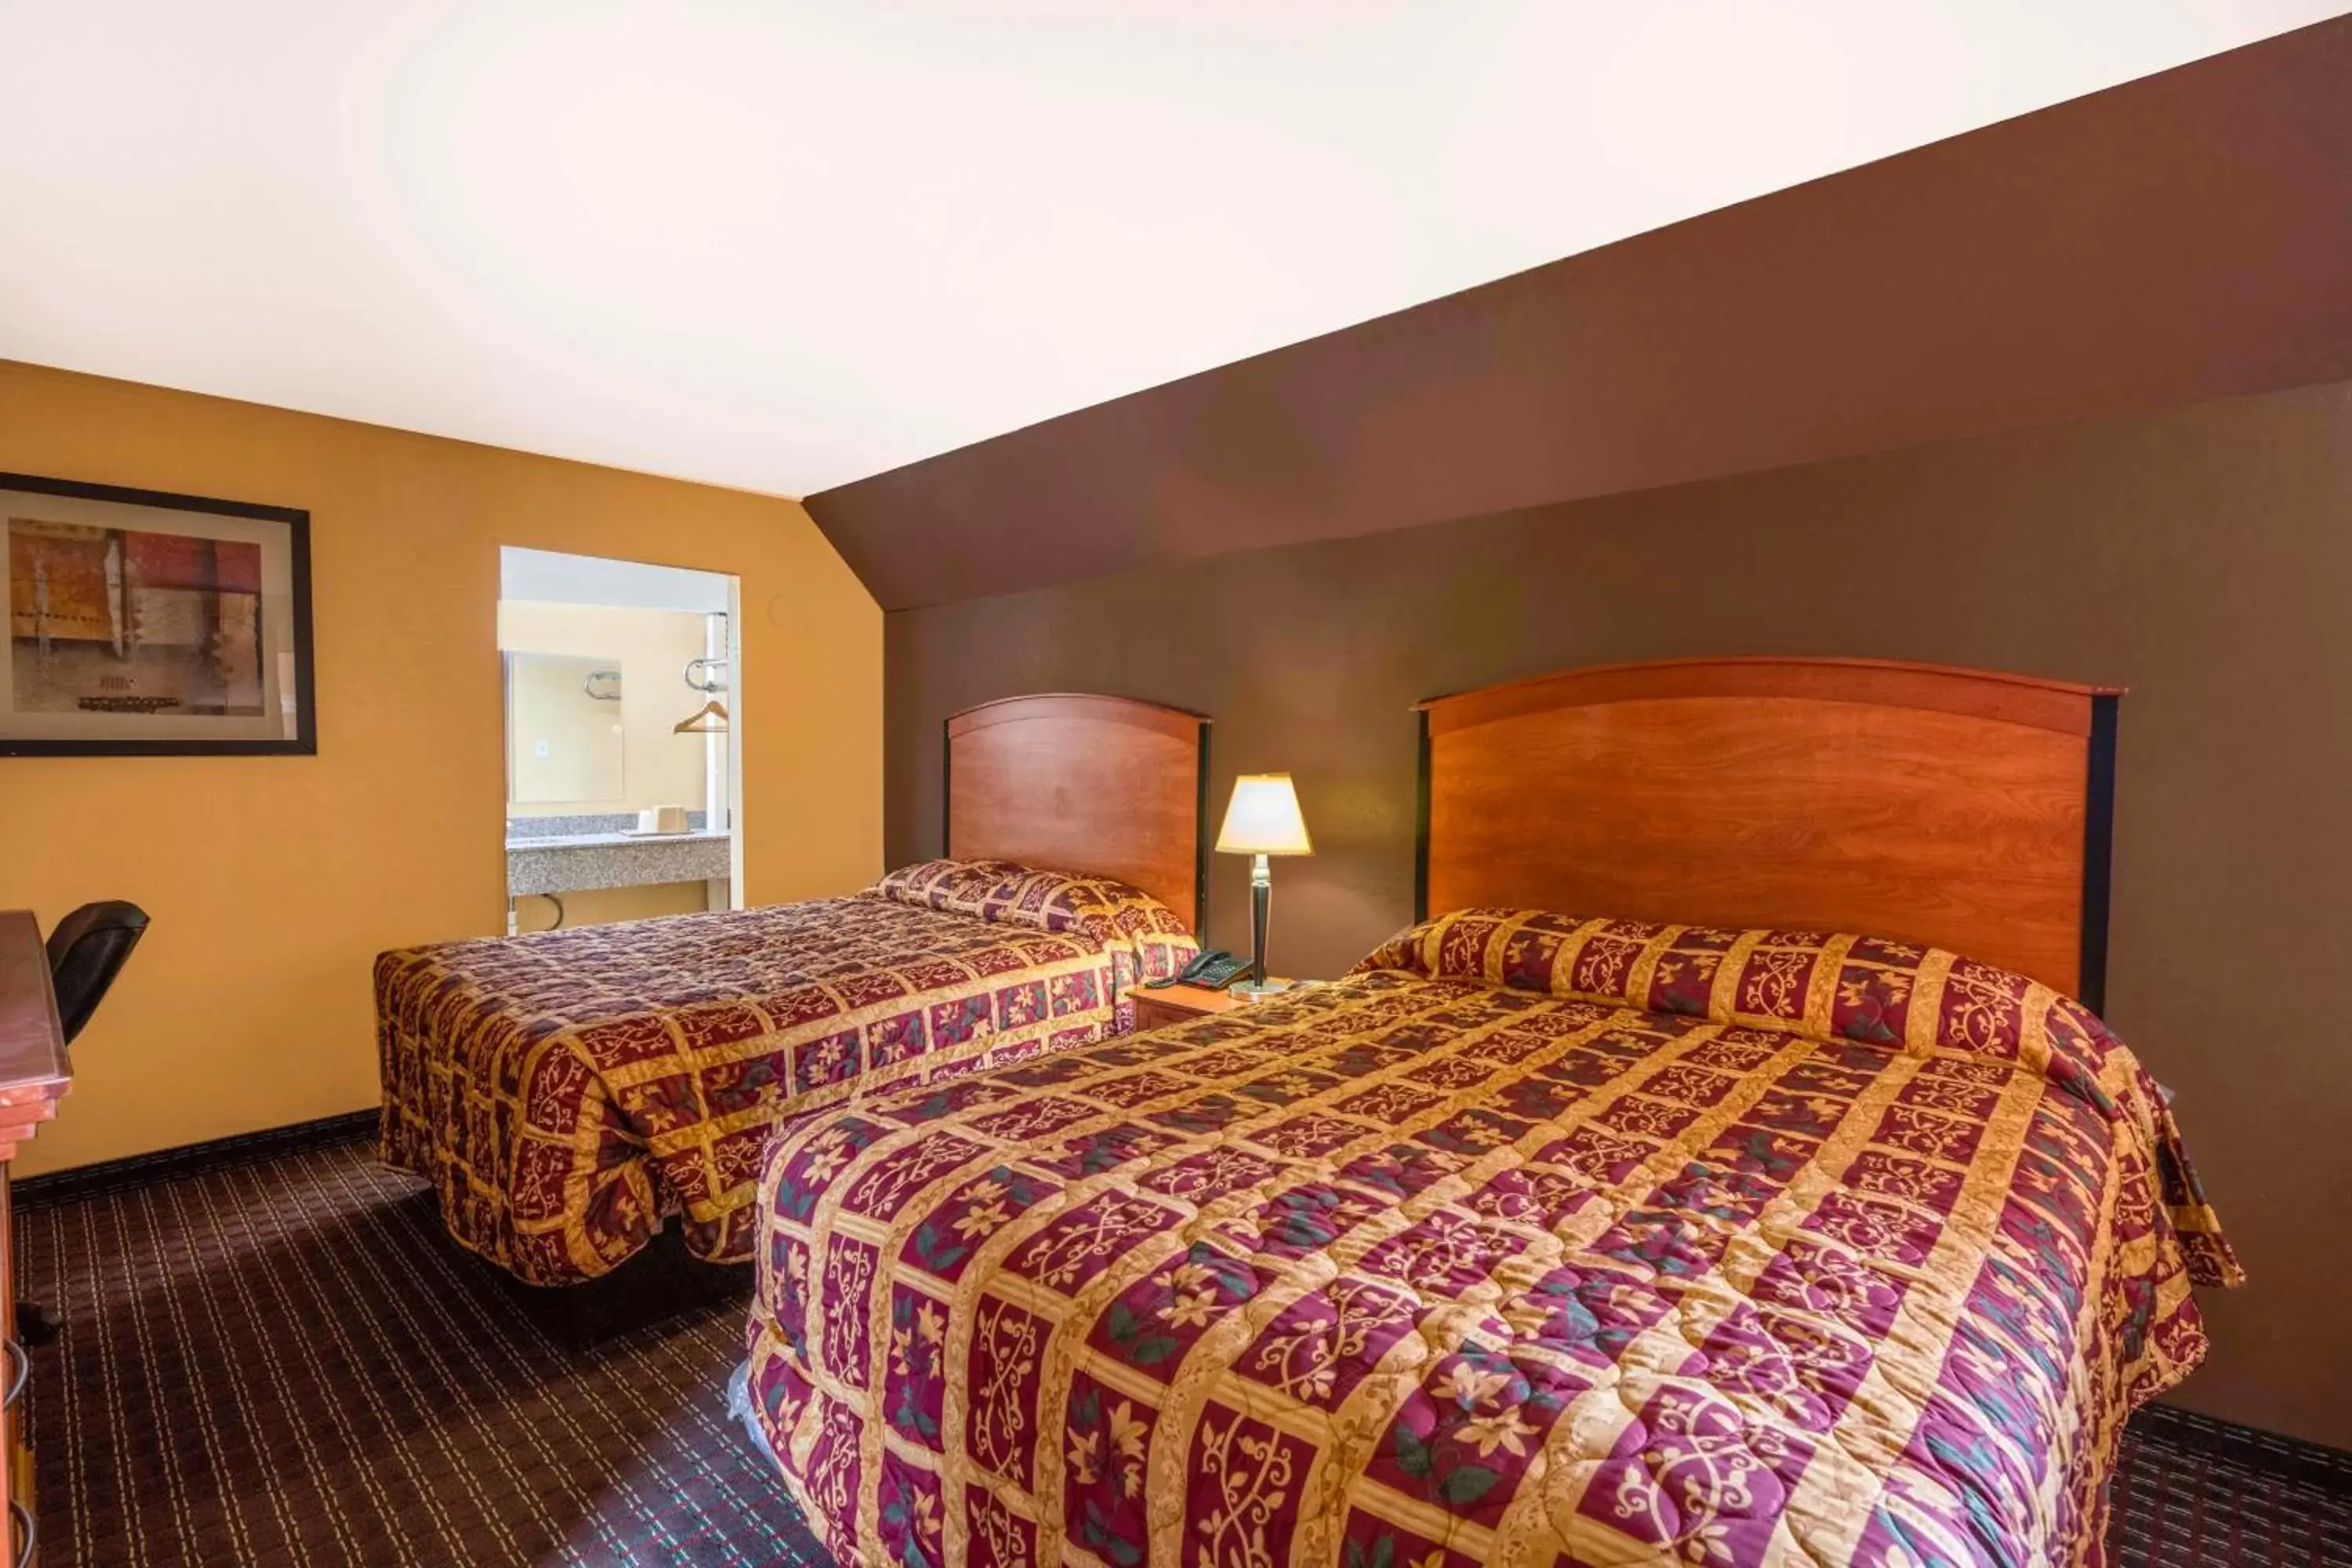 Bedroom, Bed in Oyo Hotel Odessa TX, East Business 20